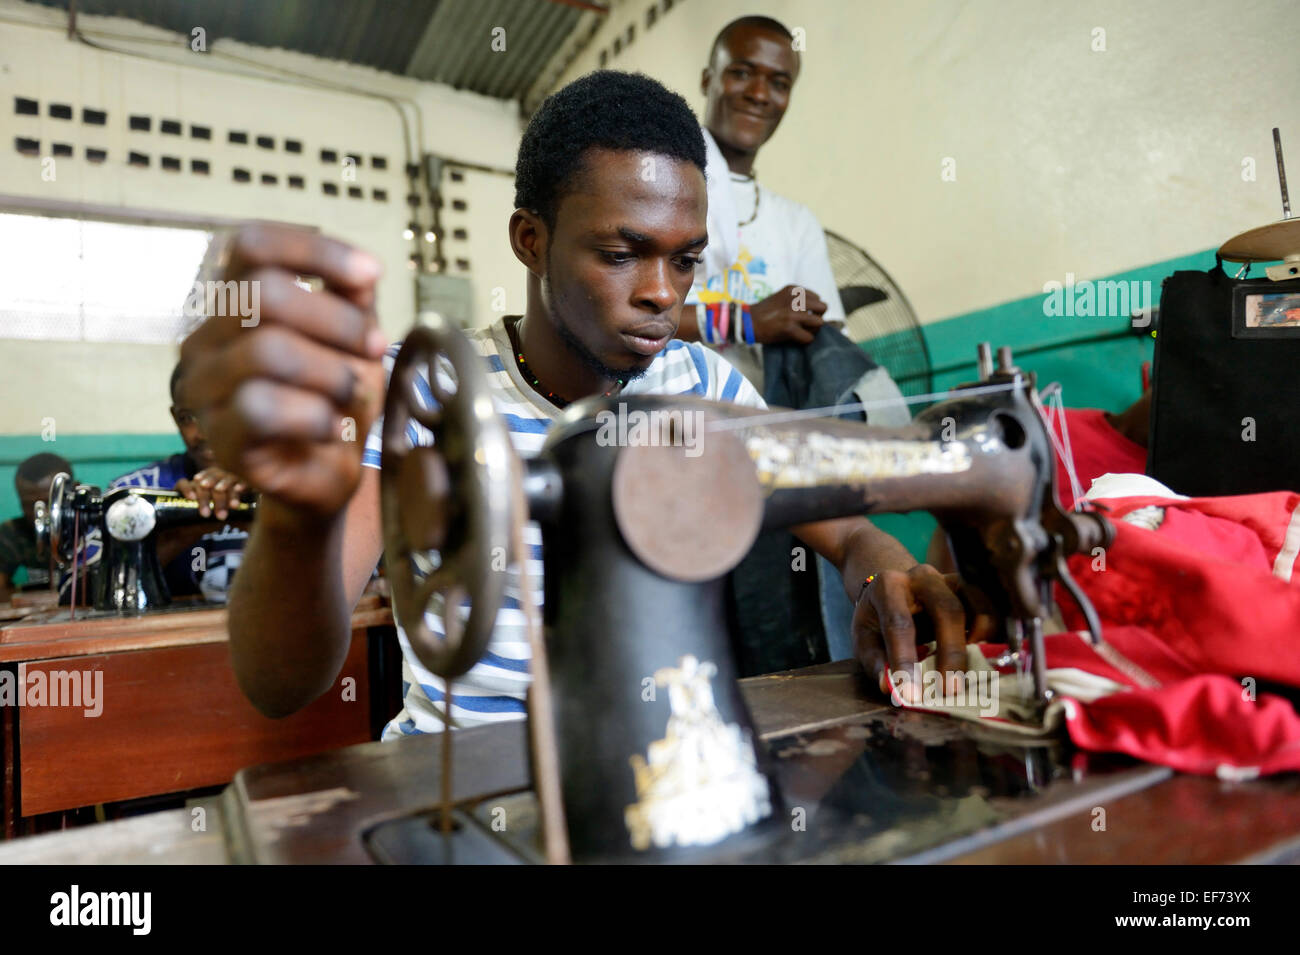 Young man working on a sewing machine learning tailoring crafts, tailoring school of the Salesian Missions Stock Photo